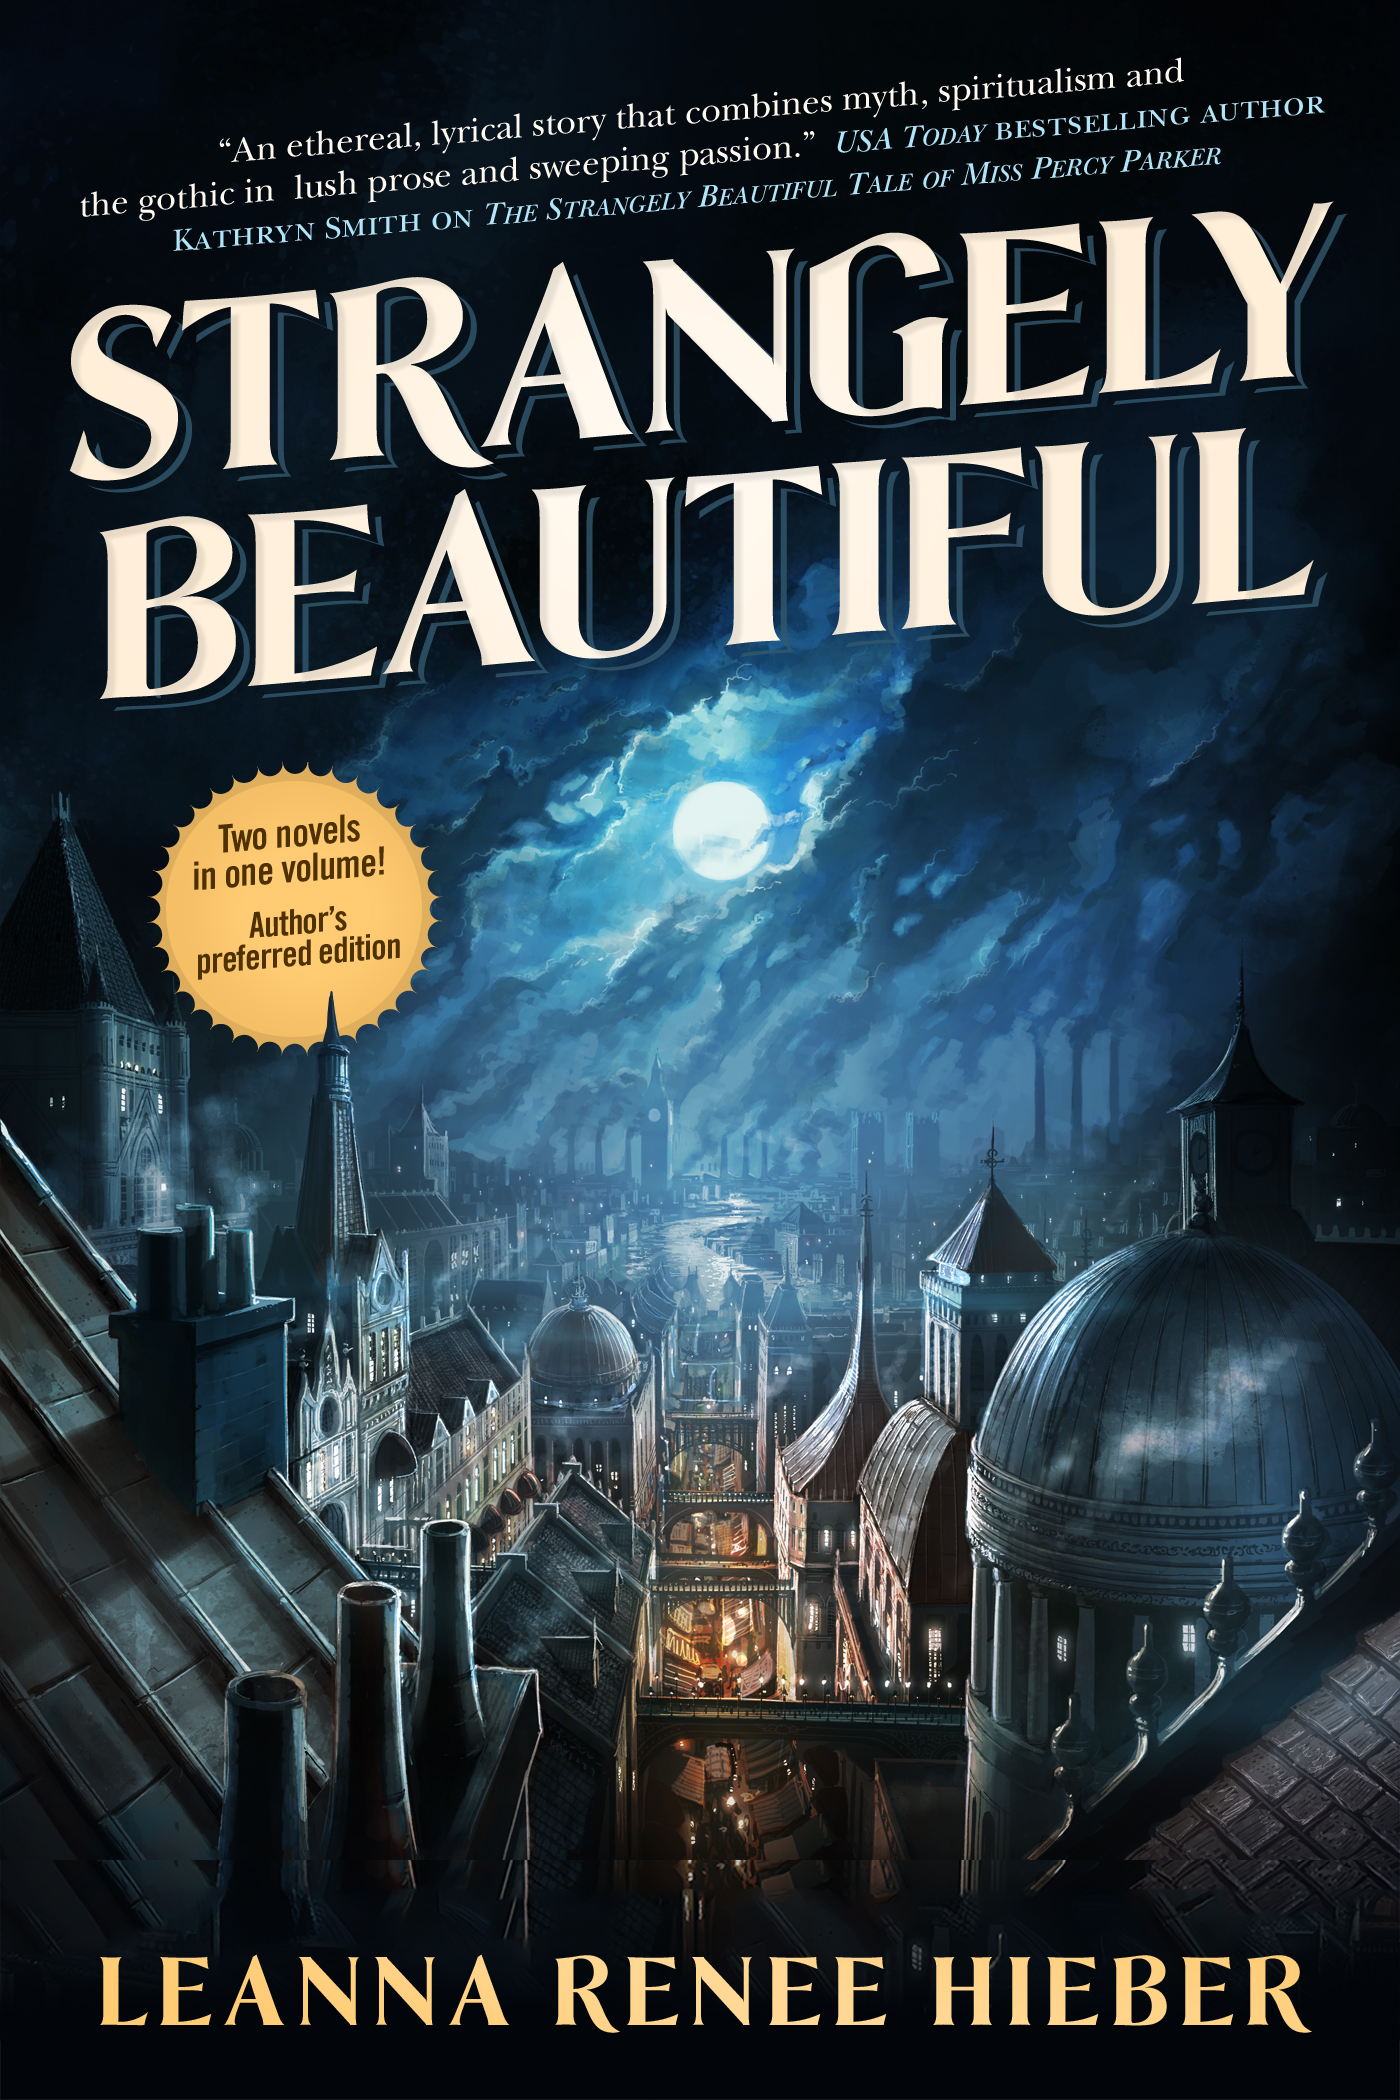 Strangely Beautiful by Leanna Renee Hieber